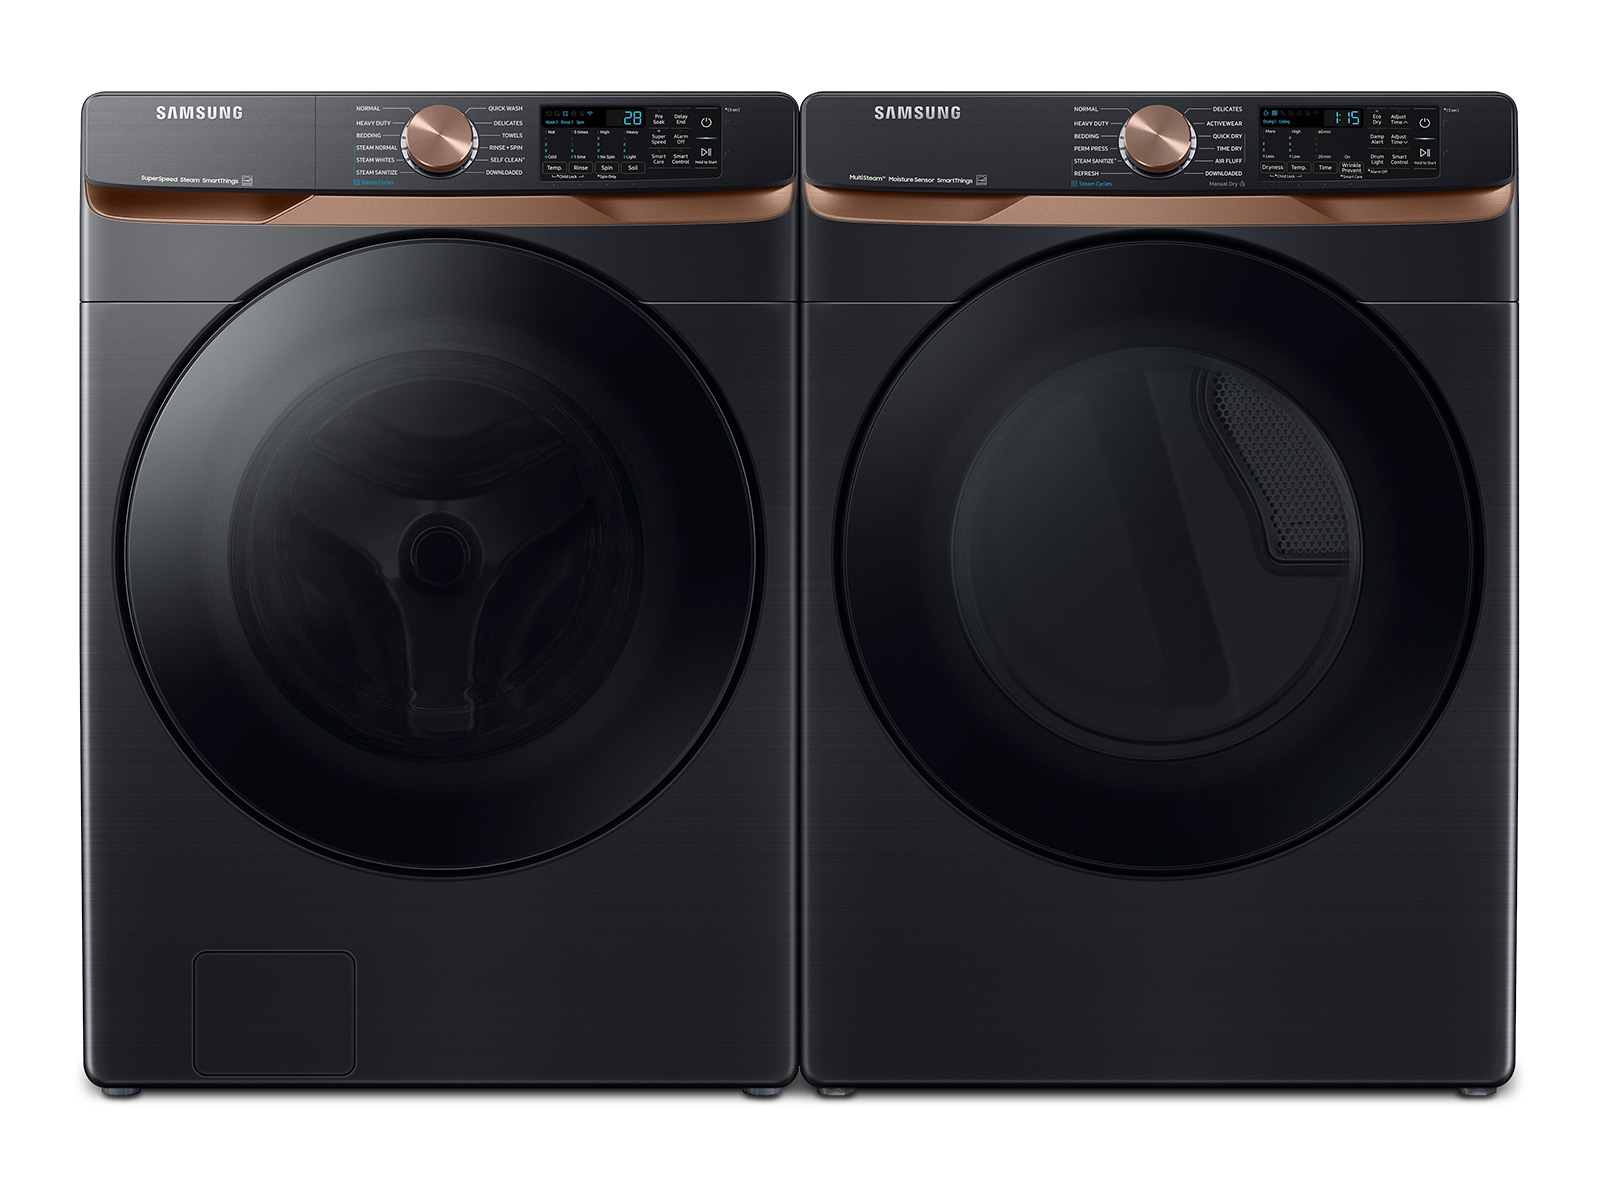 Samsung Extra Large Capacity Smart Front Load Washer with Super Speed Wash and Smart Gas Dryer with Steam Sanitize+ and Sensor Dry in Brushed in Black